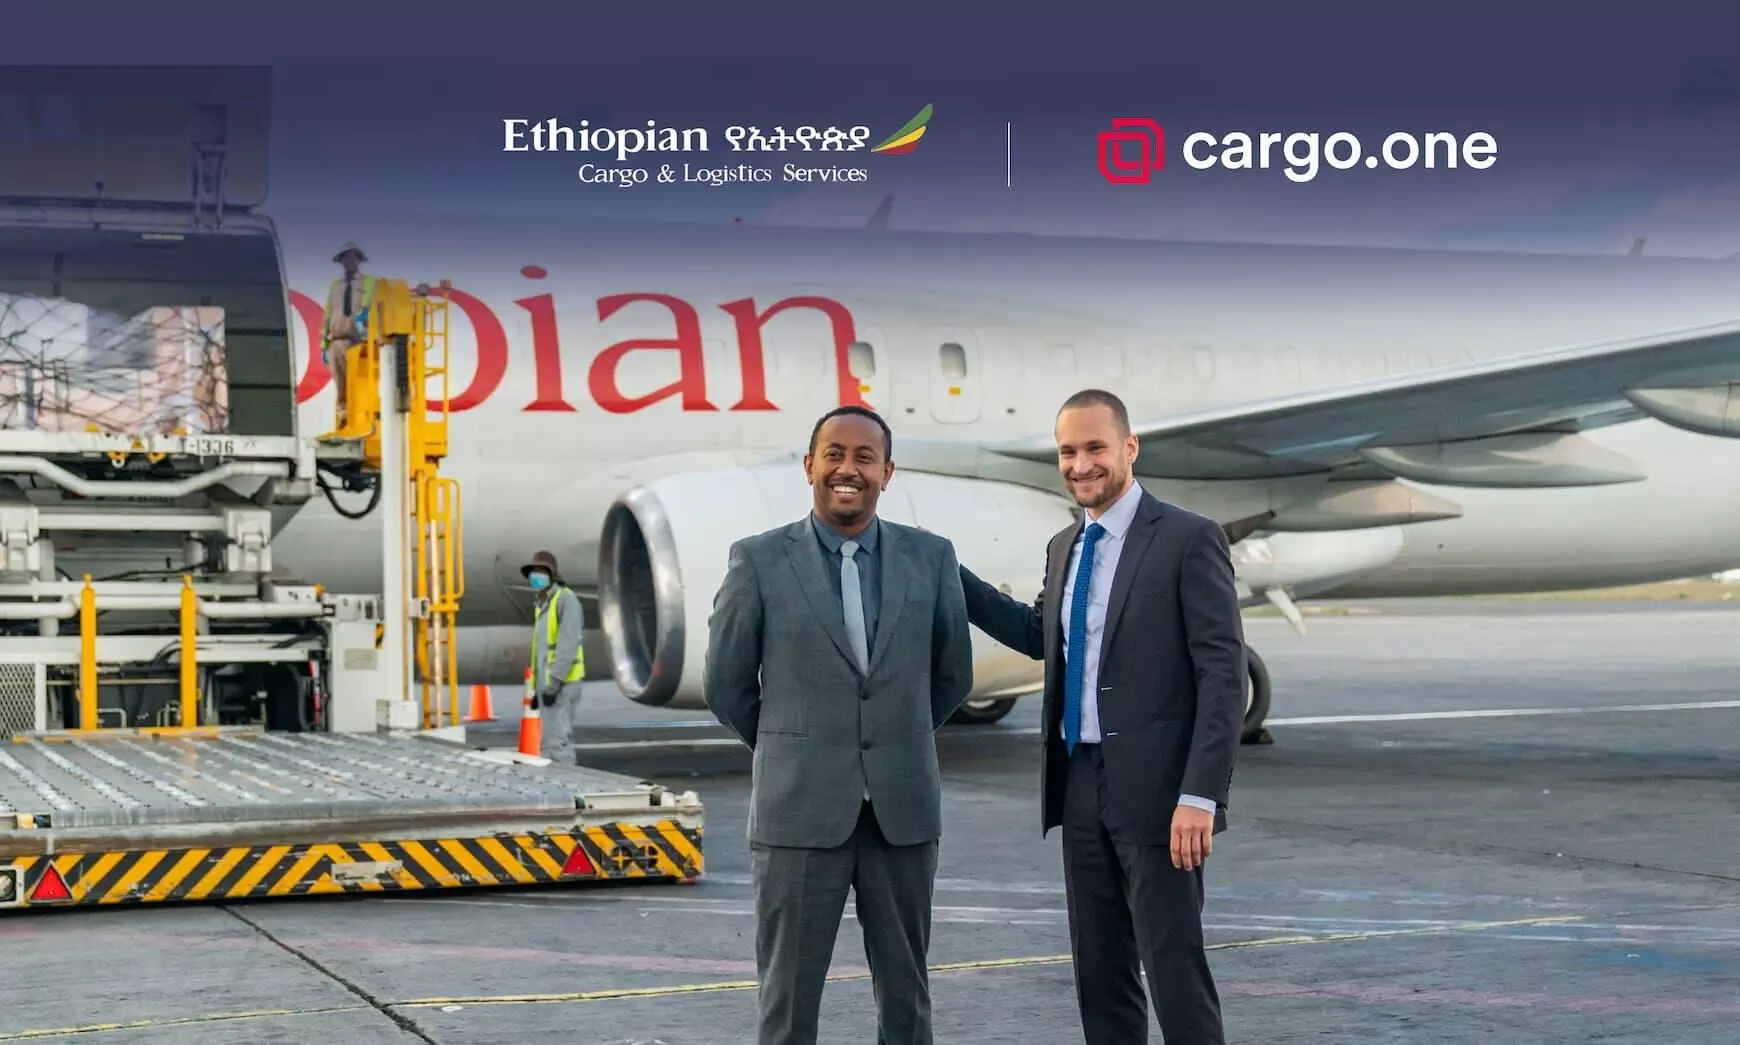 Ethiopian Cargo partners with cargo.one to push digital sales